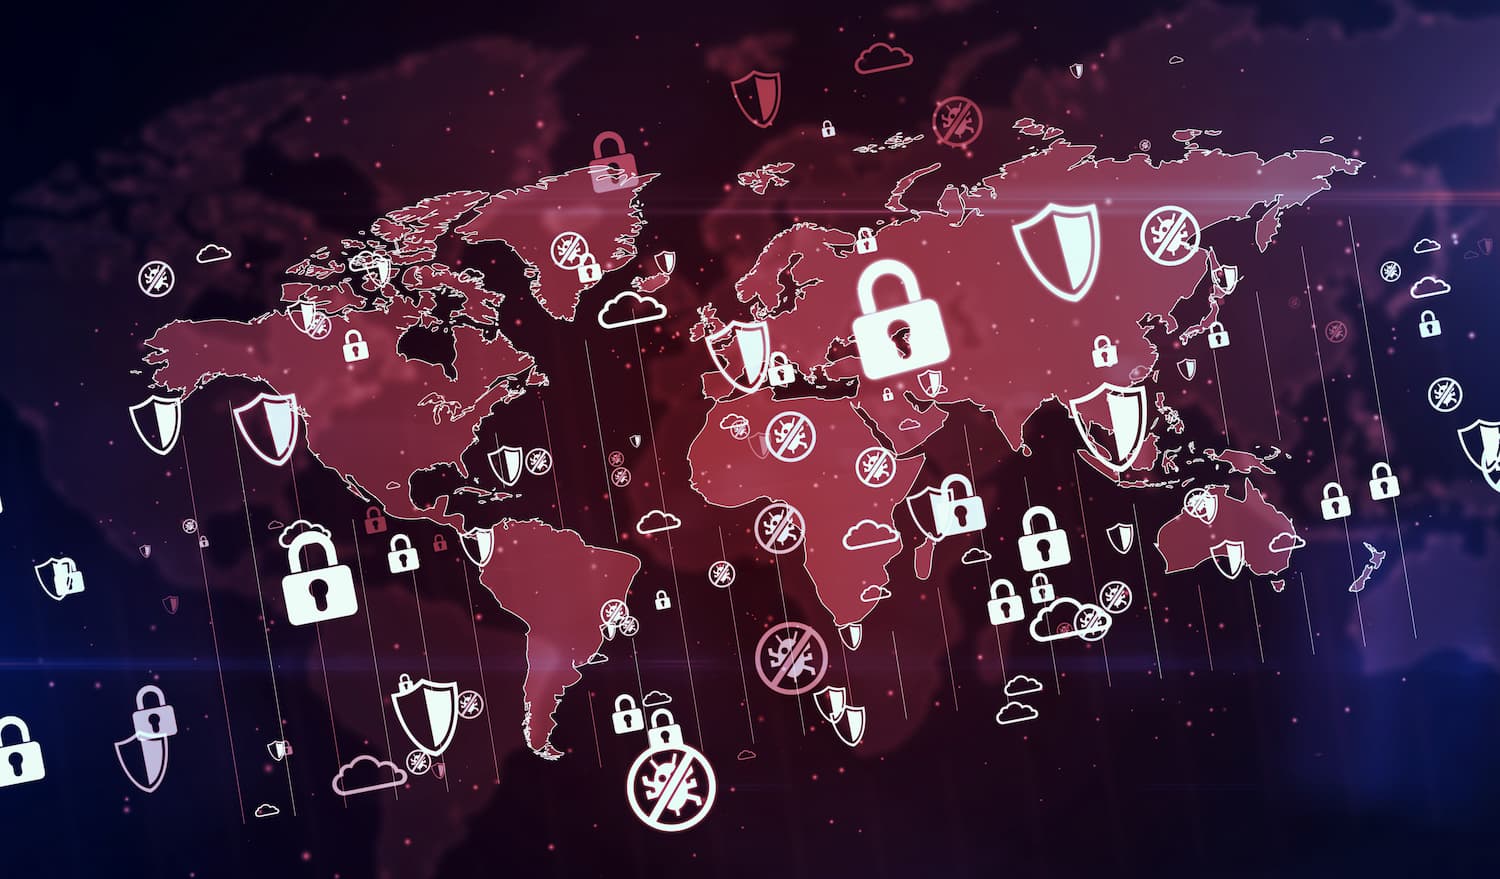 Improving cybersecurity means understanding how cyberattacks affect governments and civilians featured image